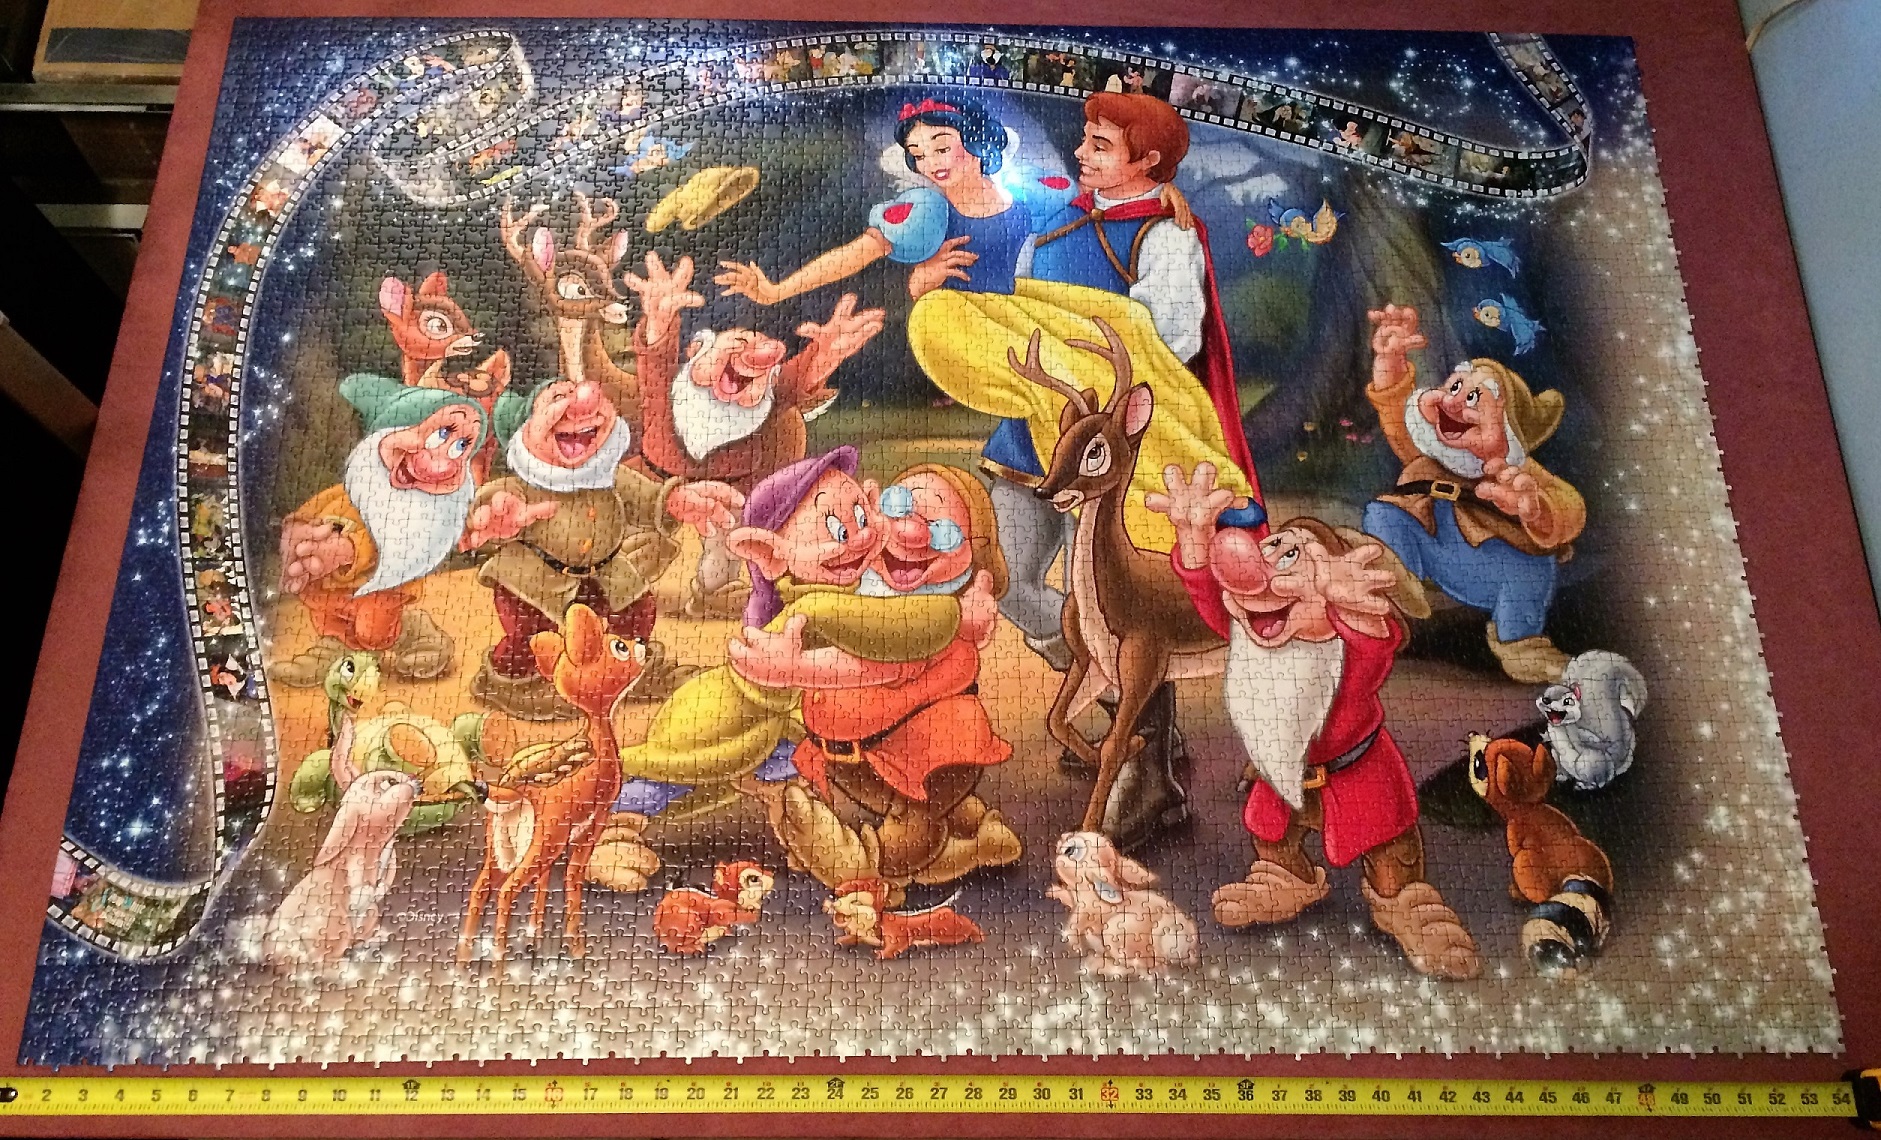 Just starting on the 40320 pieces Disney puzzle. Need some tips